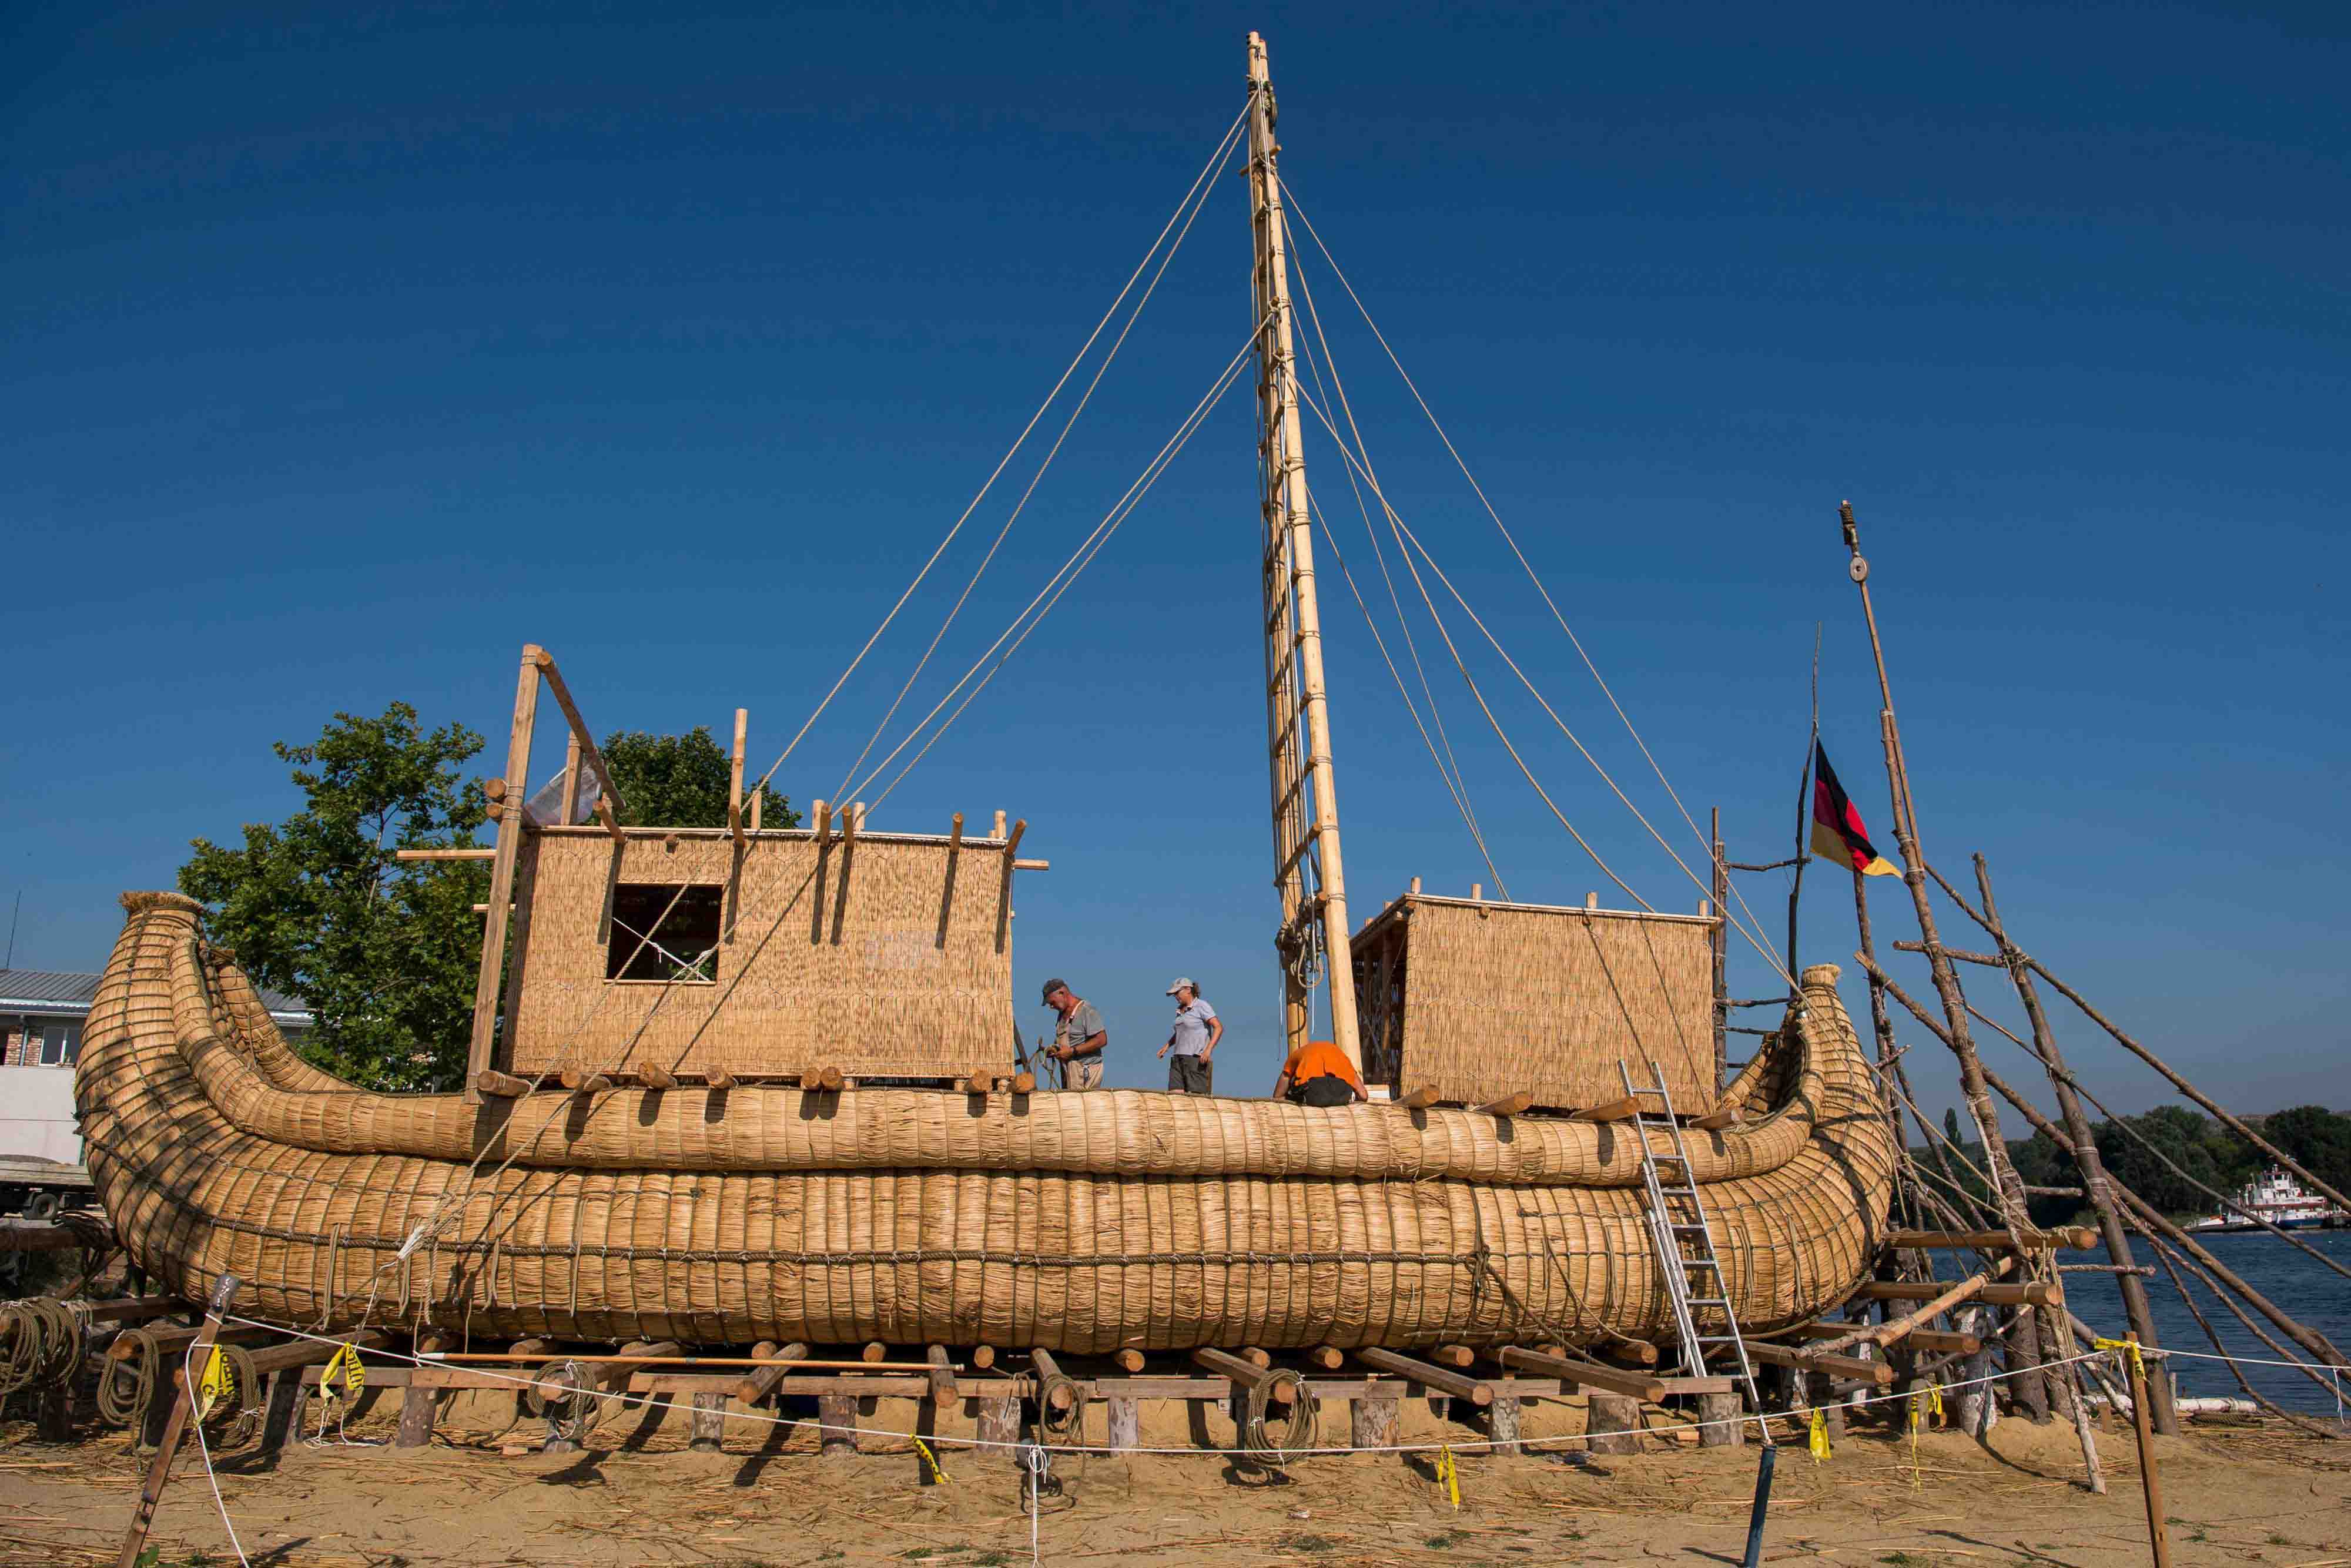 Large bundles of totora reed were lashed together with ropes to form the main body of the vessel before it was equipped with a wooden mast 